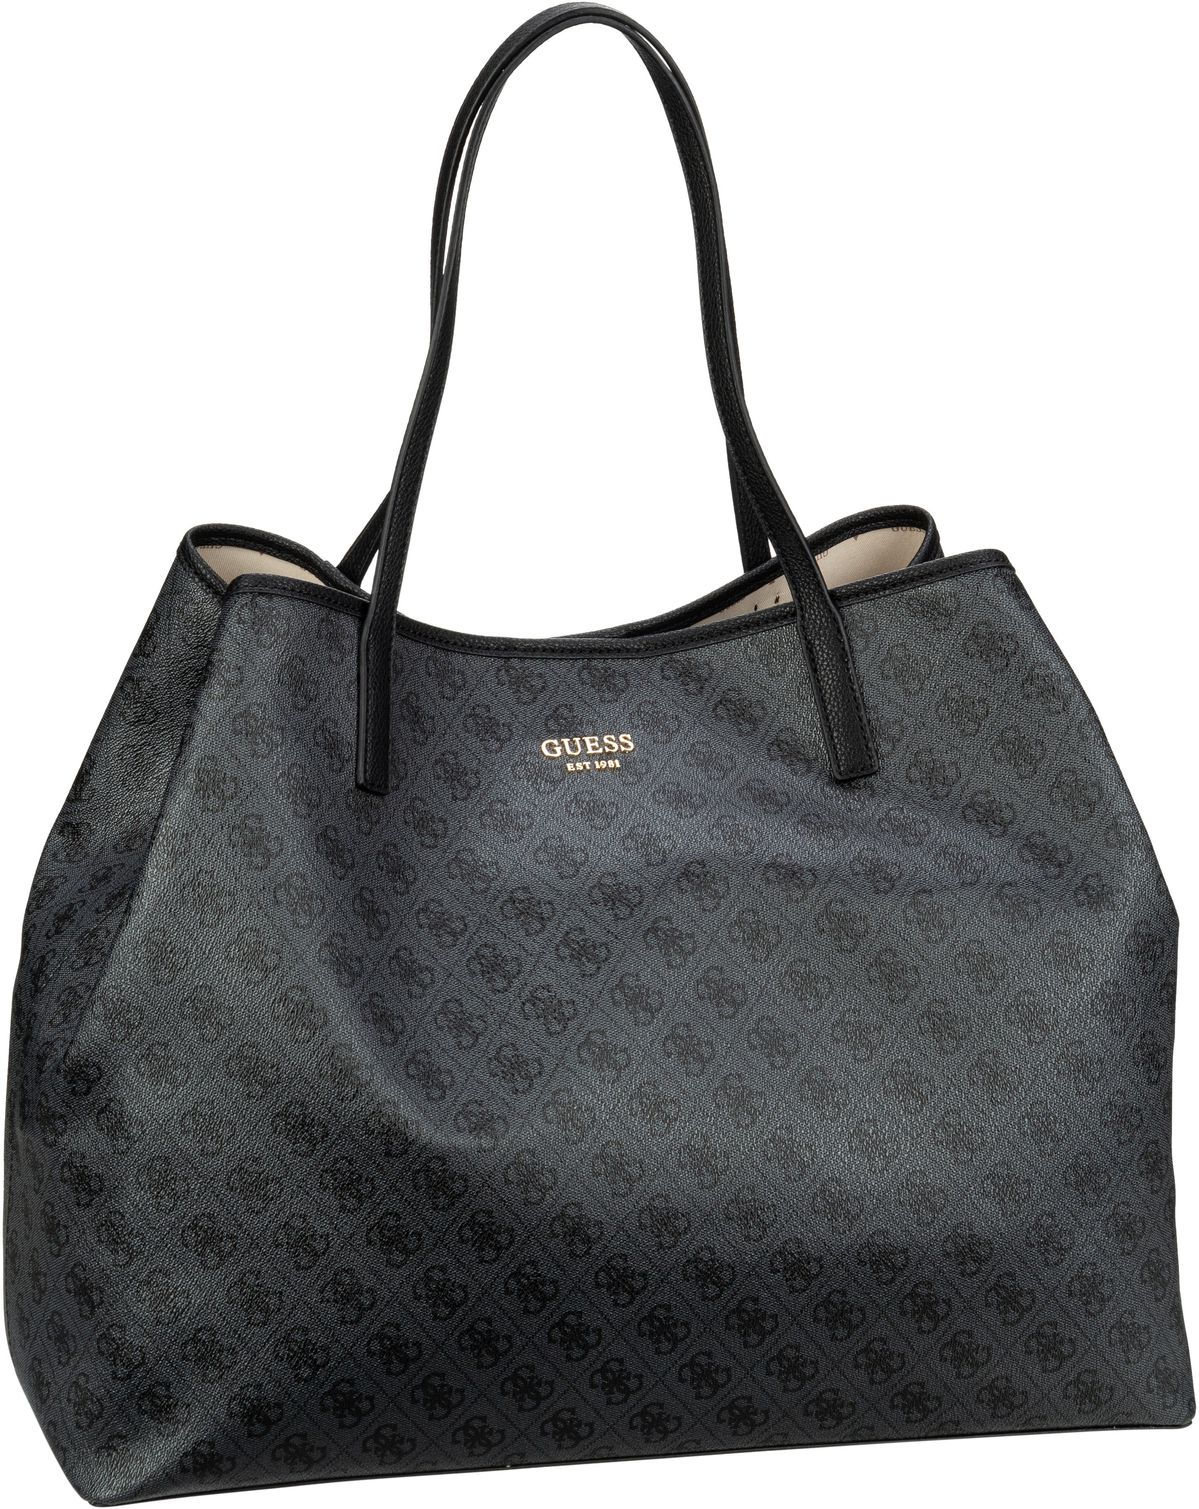 Guess Vikky Extra Large Tote - Coal